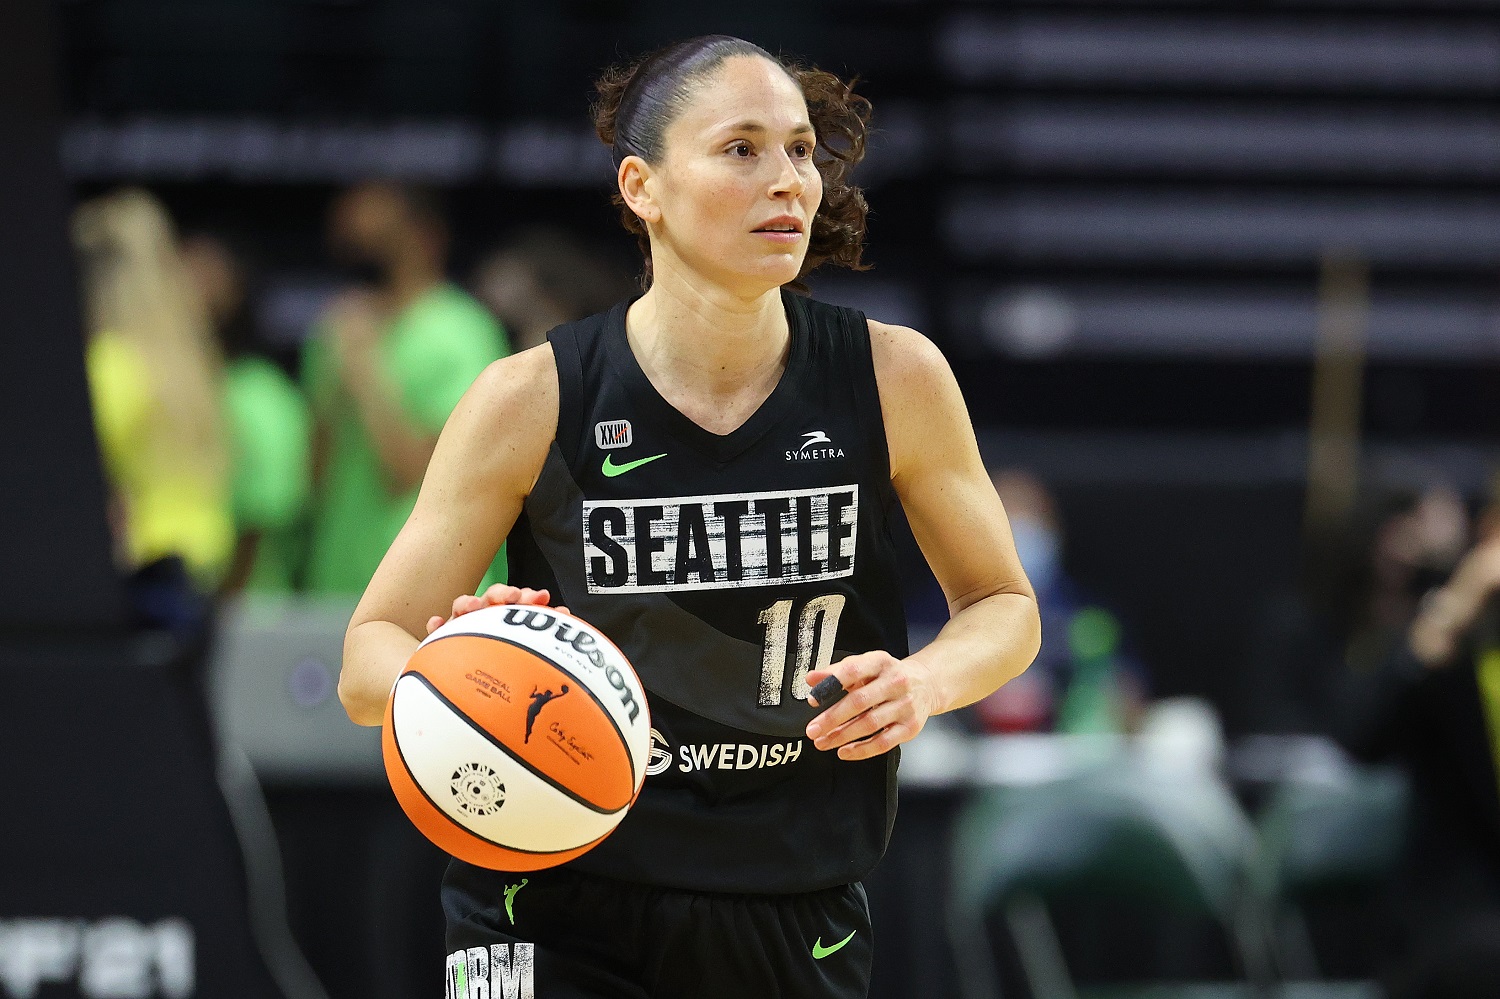 Sue Bird of the Seattle Storm brings the ball up the court against the Las Vegas Aces on May 15, 2021, in Everett, Washington.